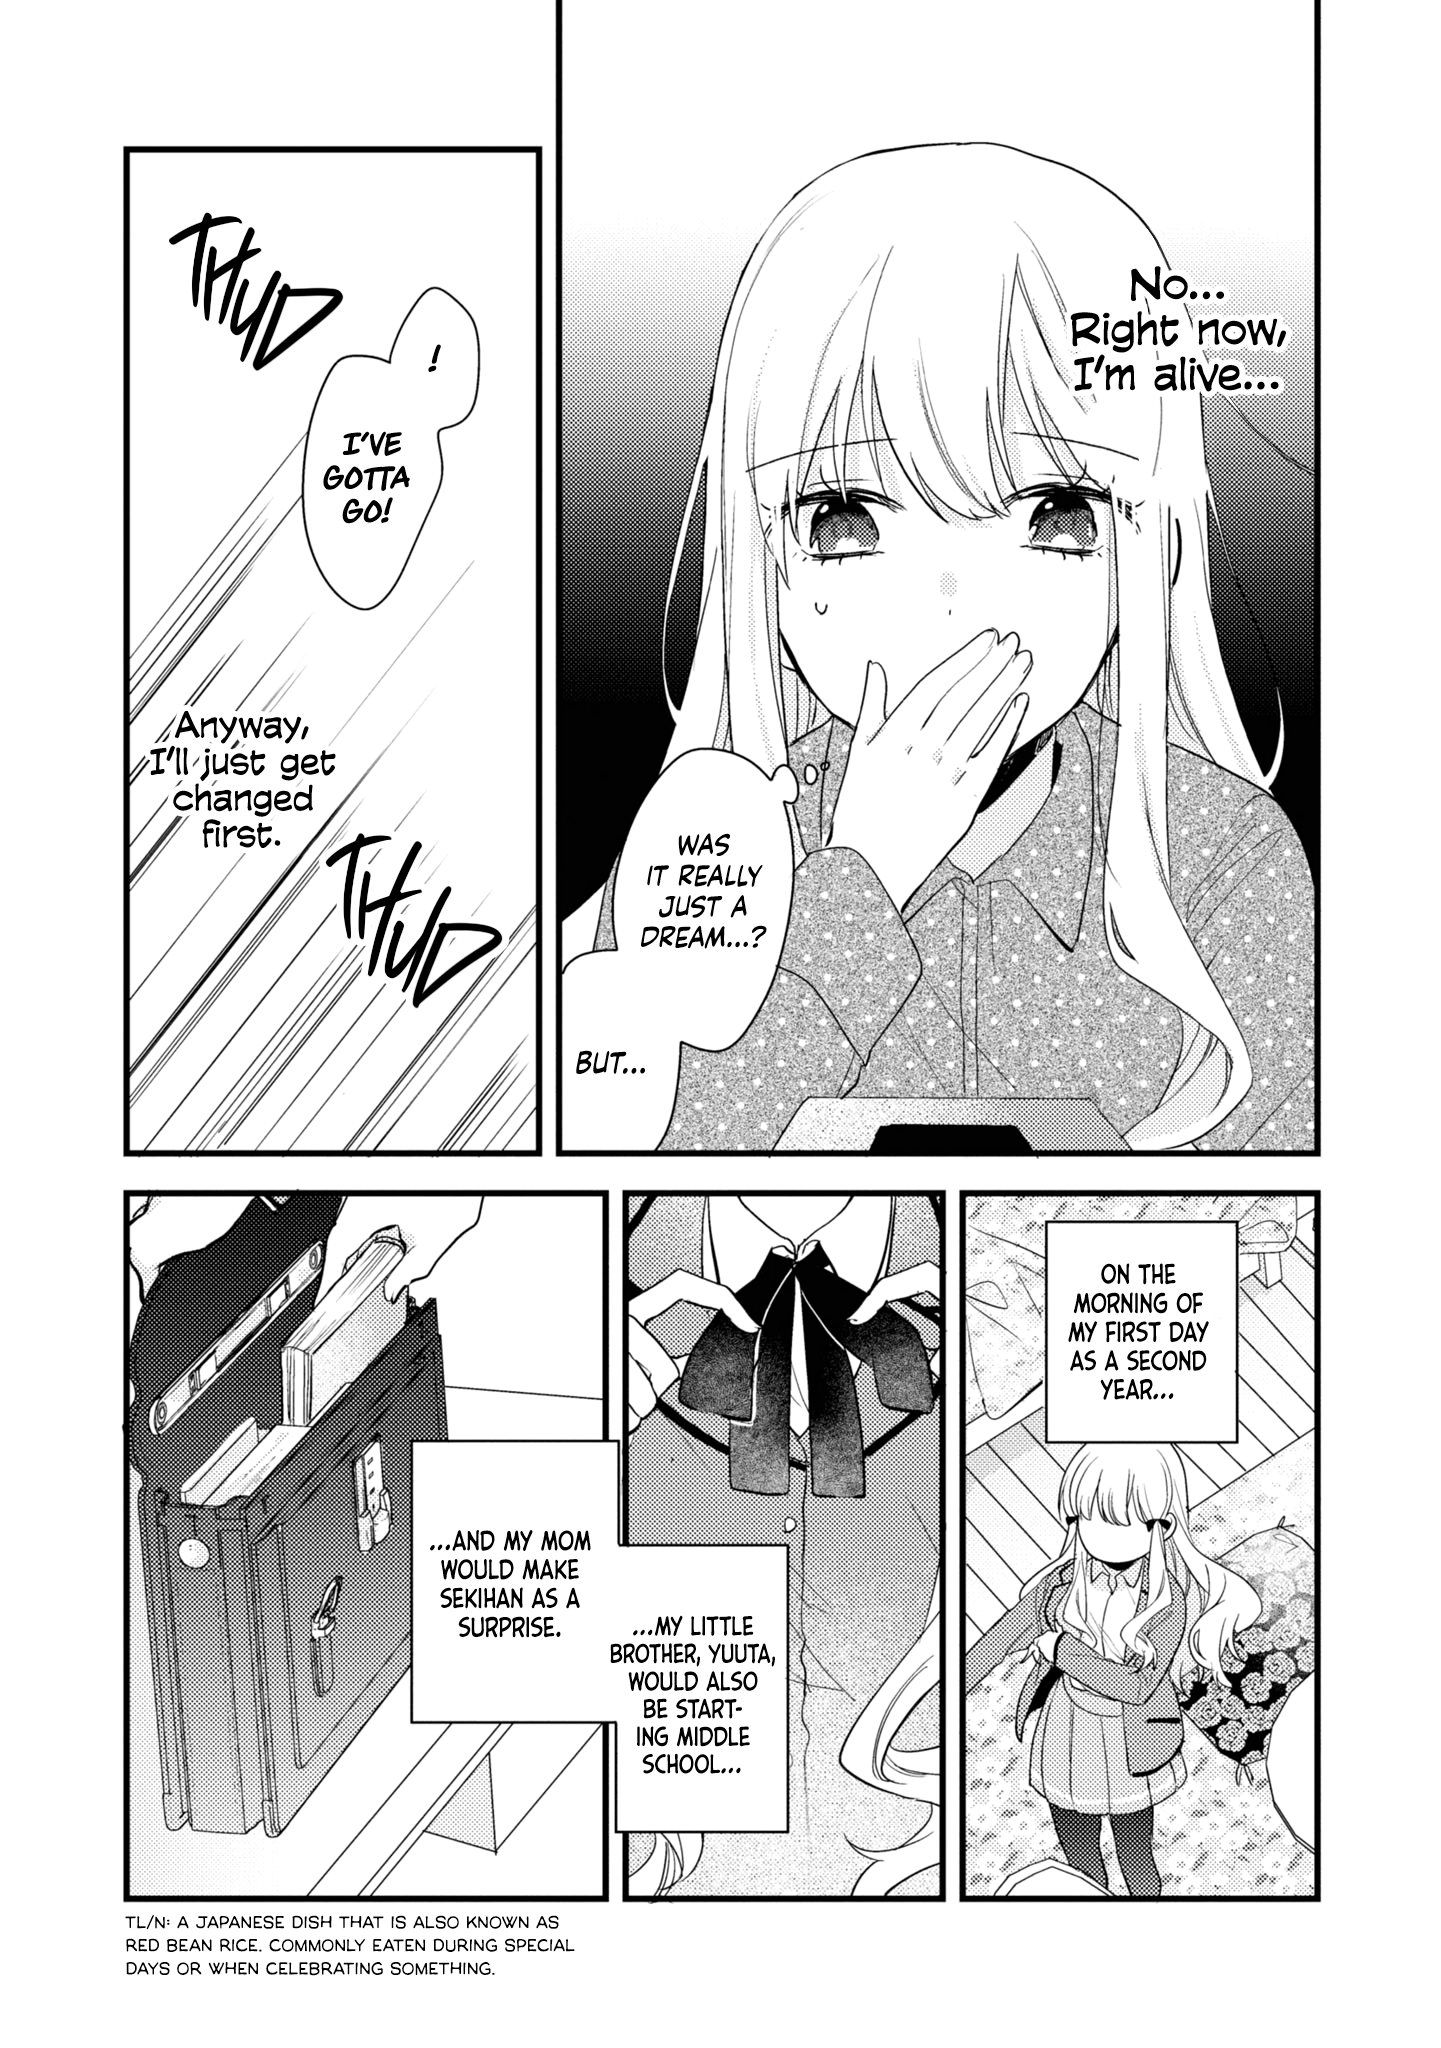 I Have A Second Chance At Life, So I’Ll Pamper My Yandere Boyfriend For A Happy Ending!! Chapter 1 #13